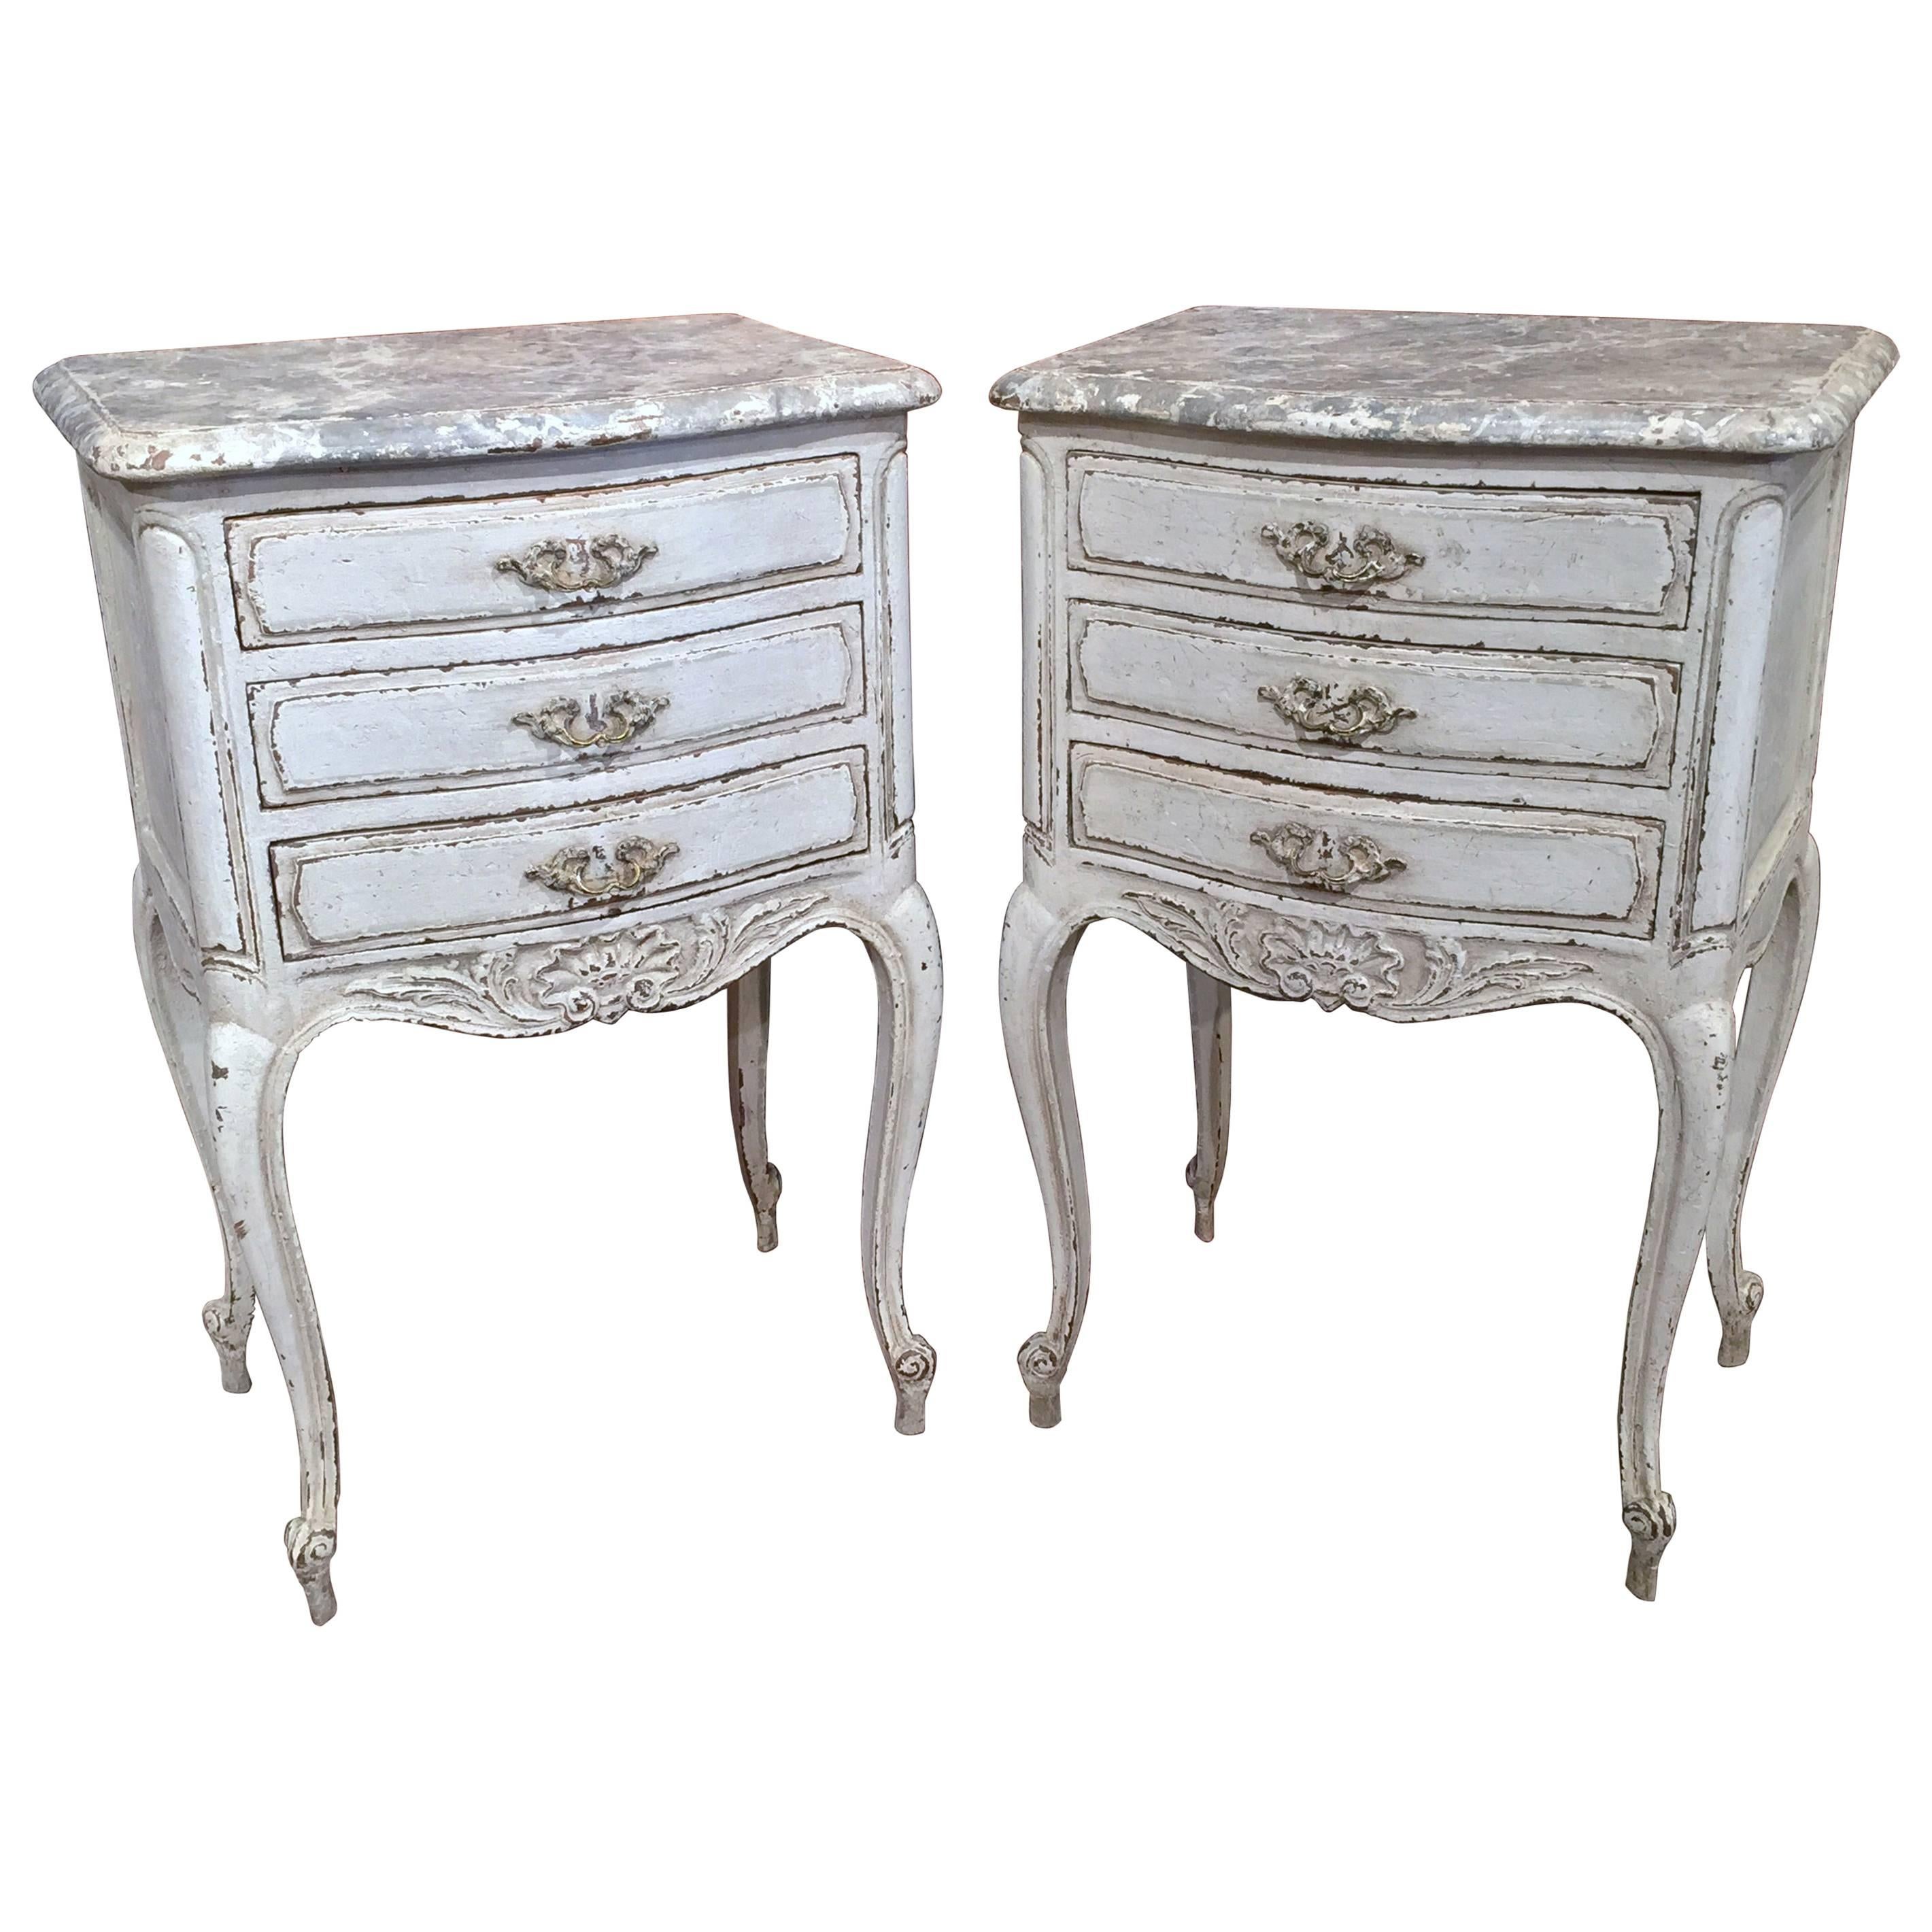 Pair of 19th Century French Carved Painted Bedside Tables with Faux Marble Top